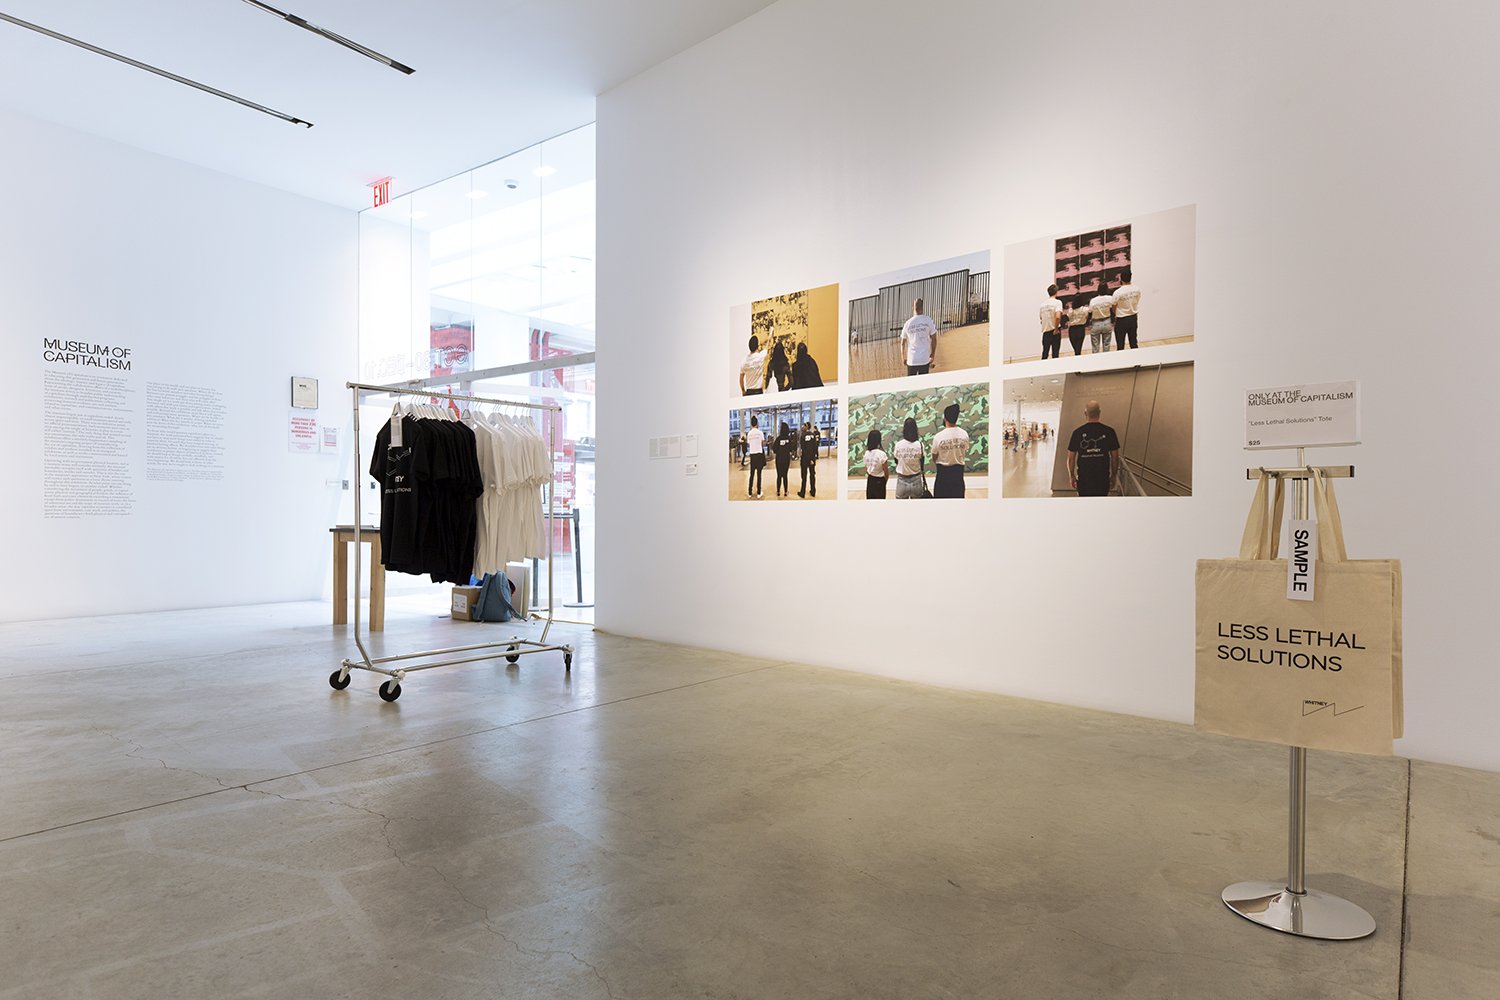   Installation view ,  Museum of Capitalism , The New School, NY, NY 